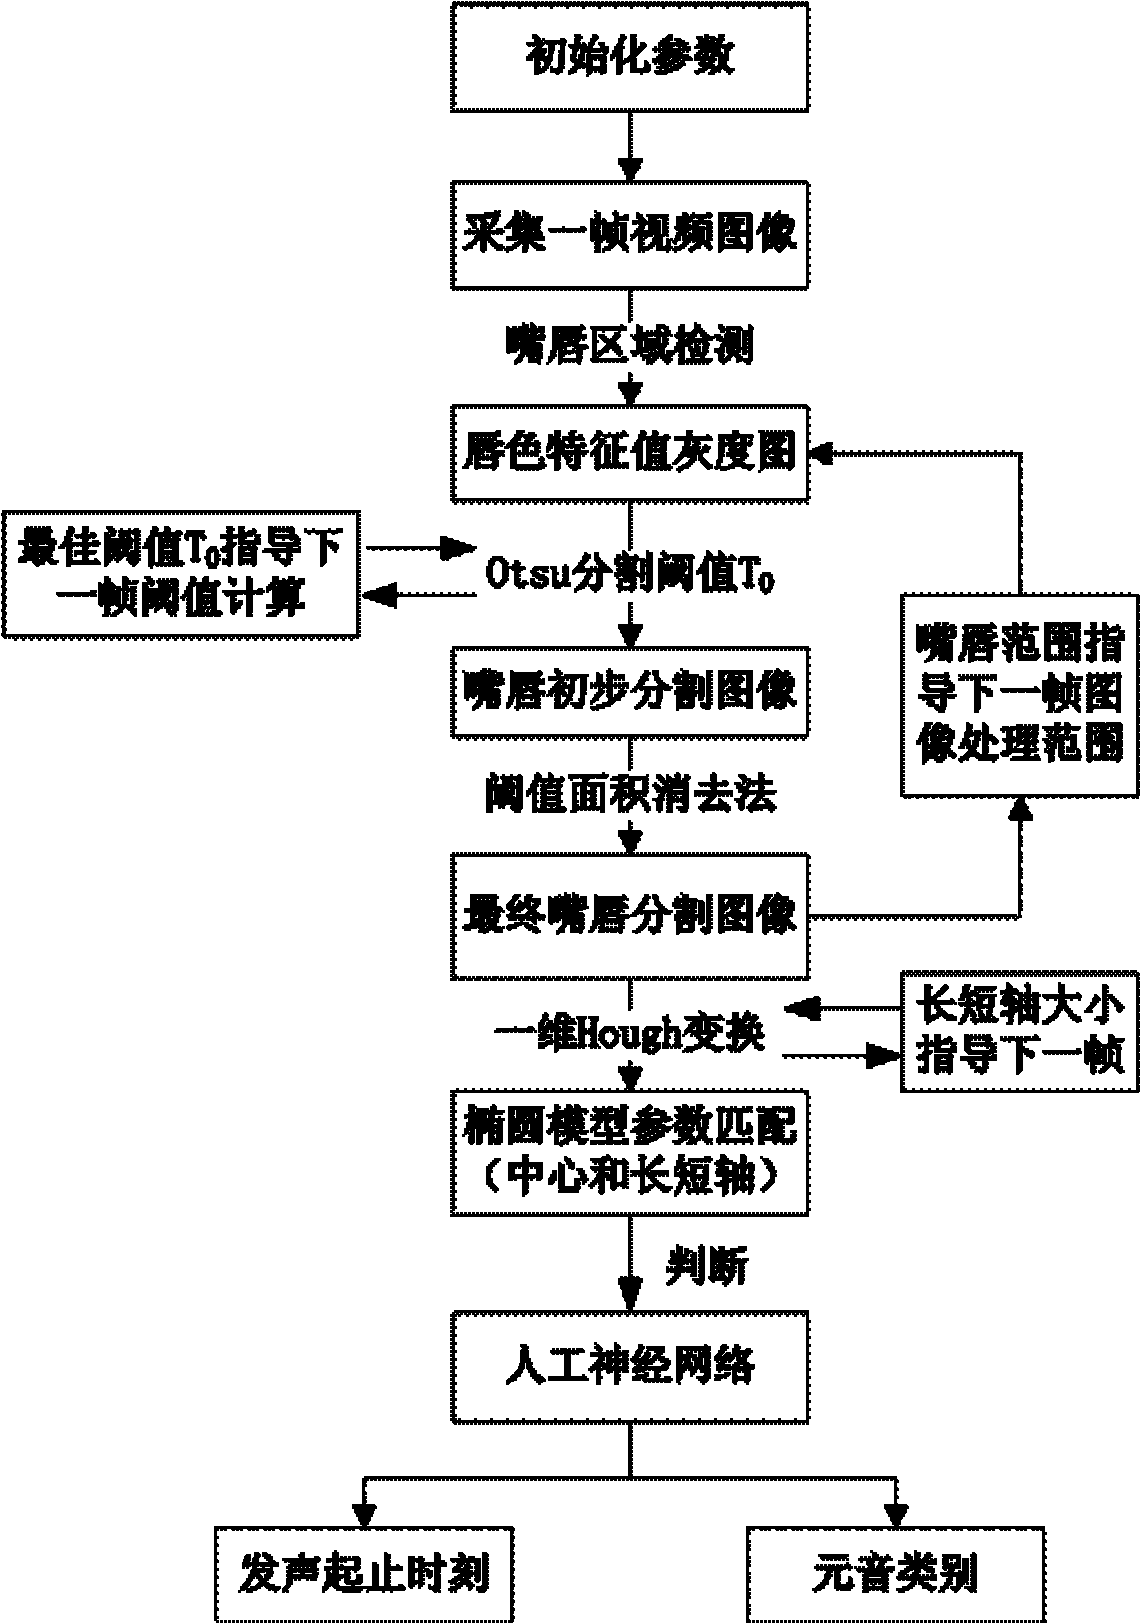 Electronic larynx speech reconstructing method and system thereof